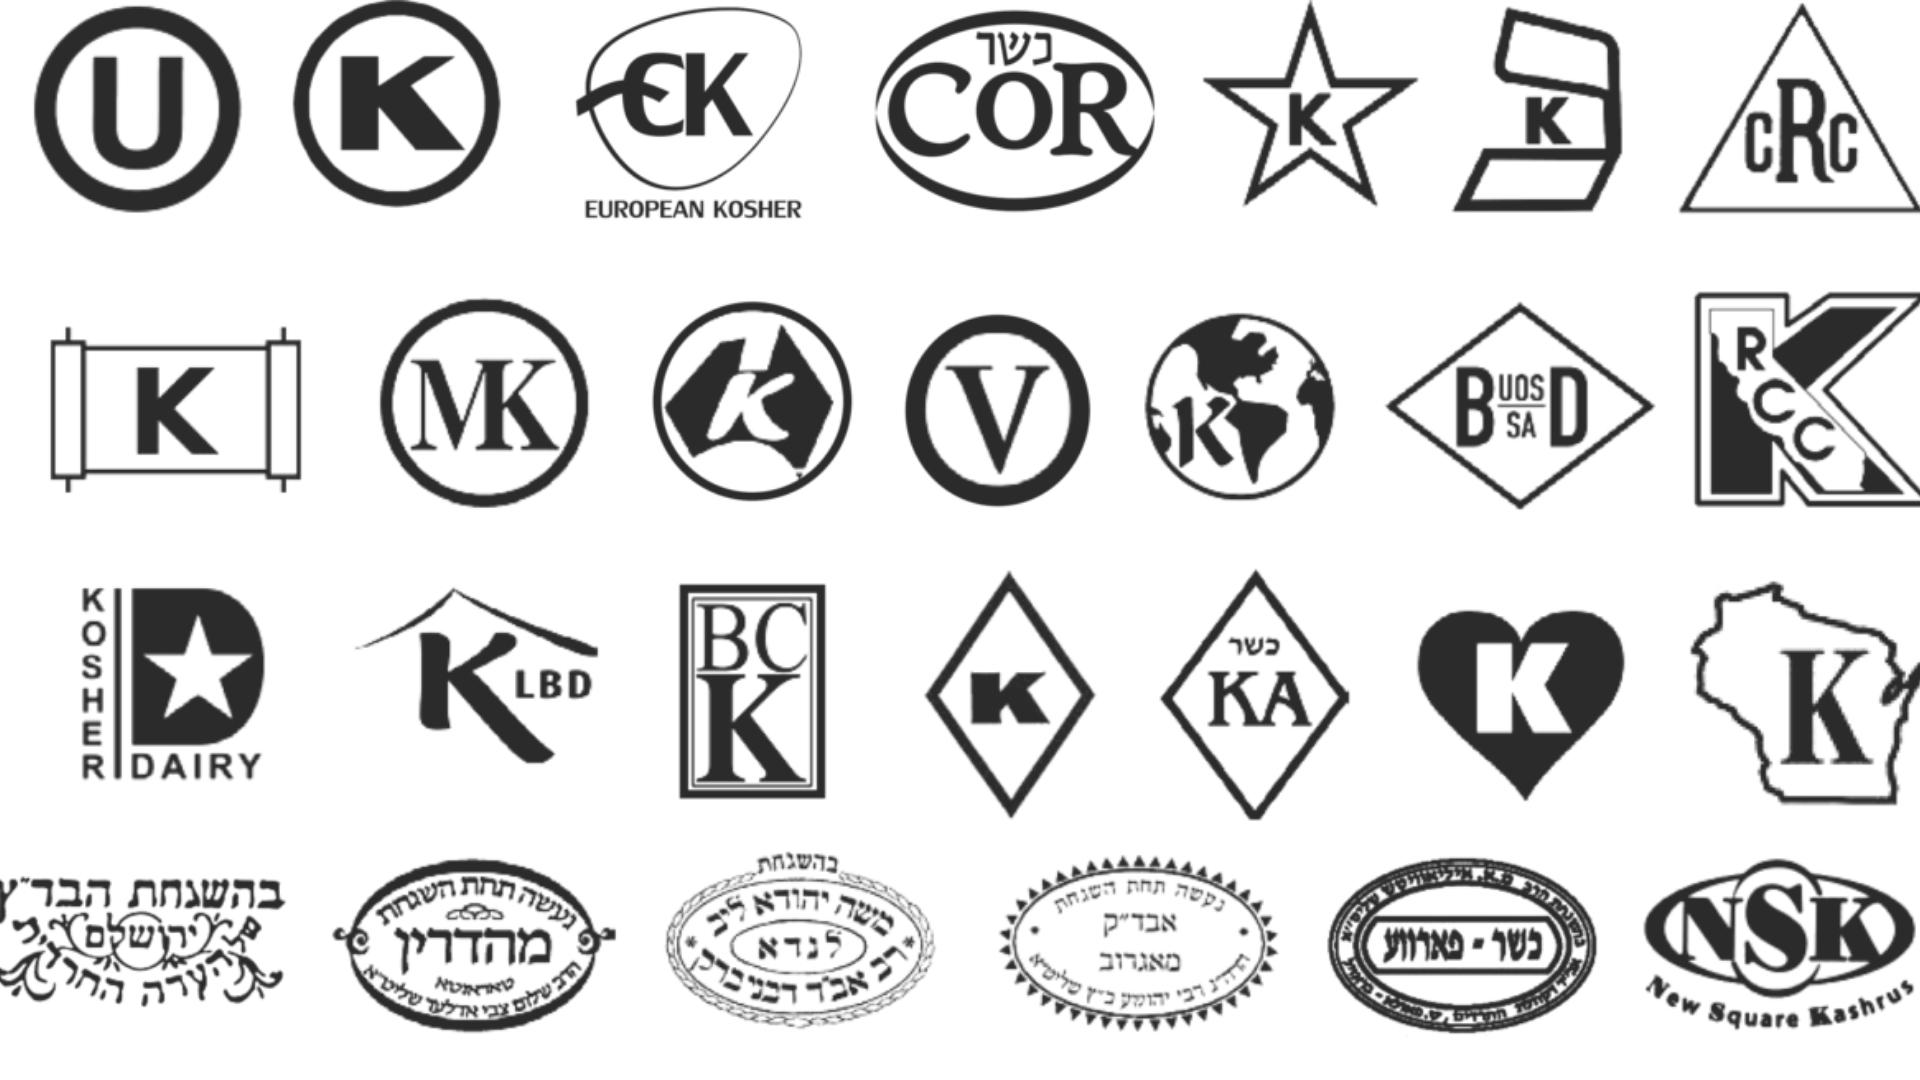 A banner showing 27 various icons used by the food service industry to indicate kosher certification.